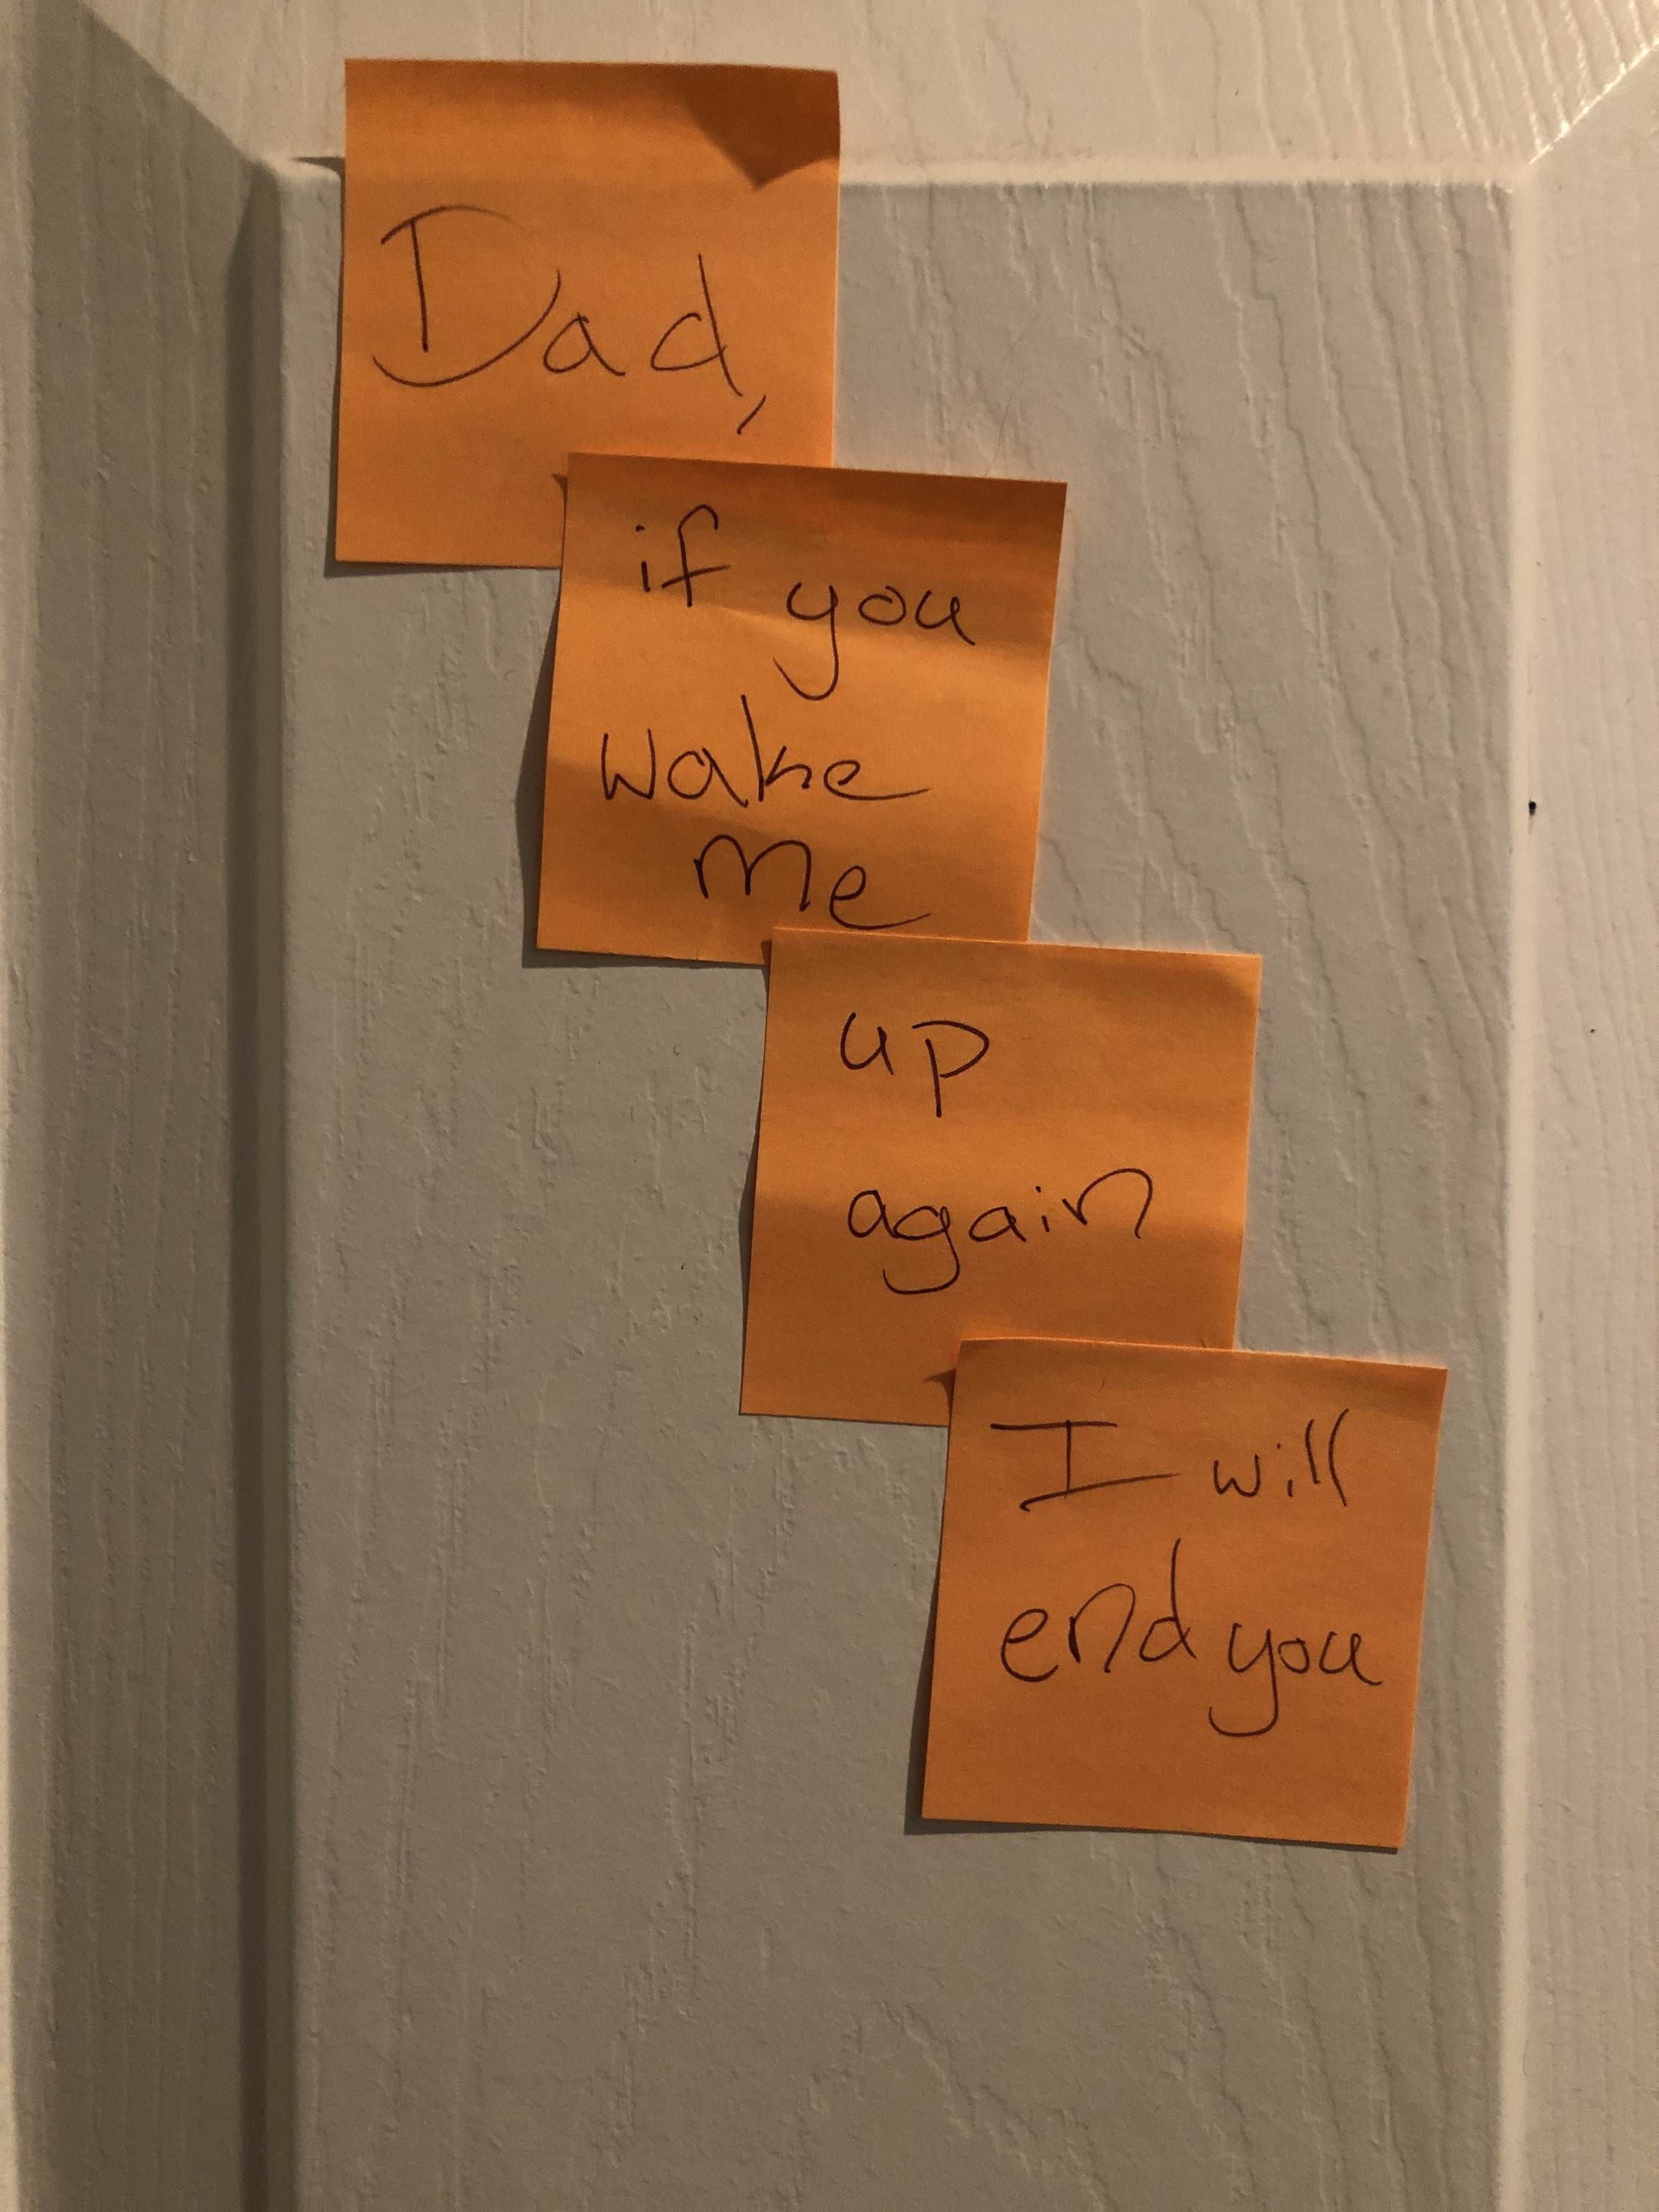 My 13 yo daughter left me a death threat on a Saturday morning.